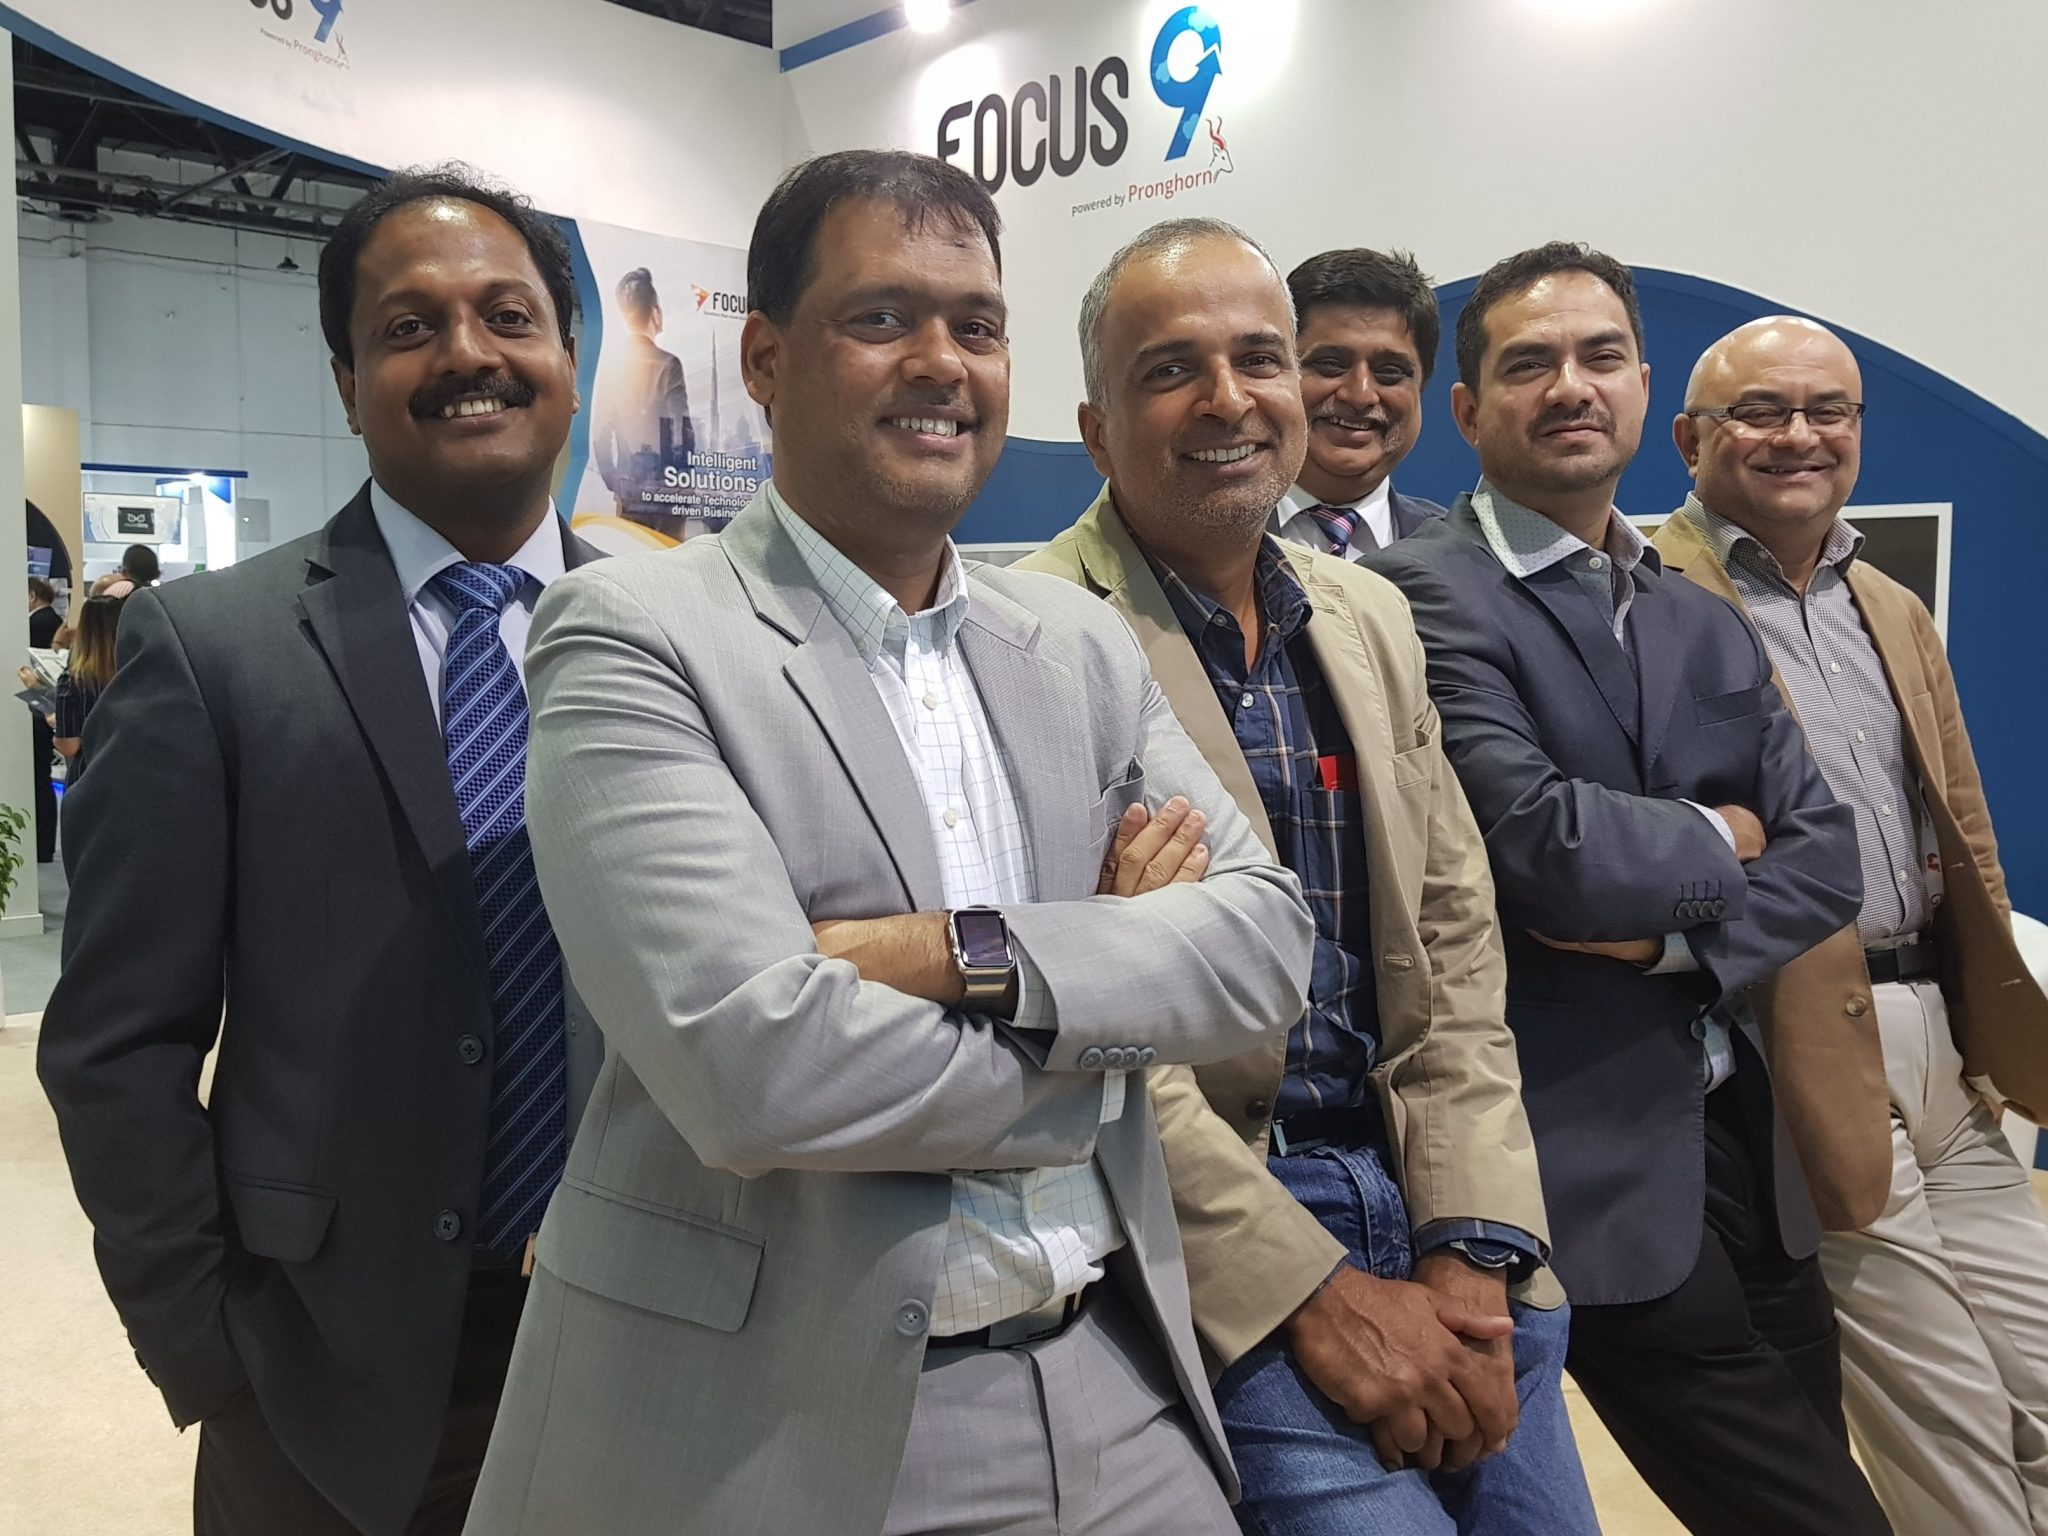 Focus Softnet launches Focus 9 in Middle East and Africa